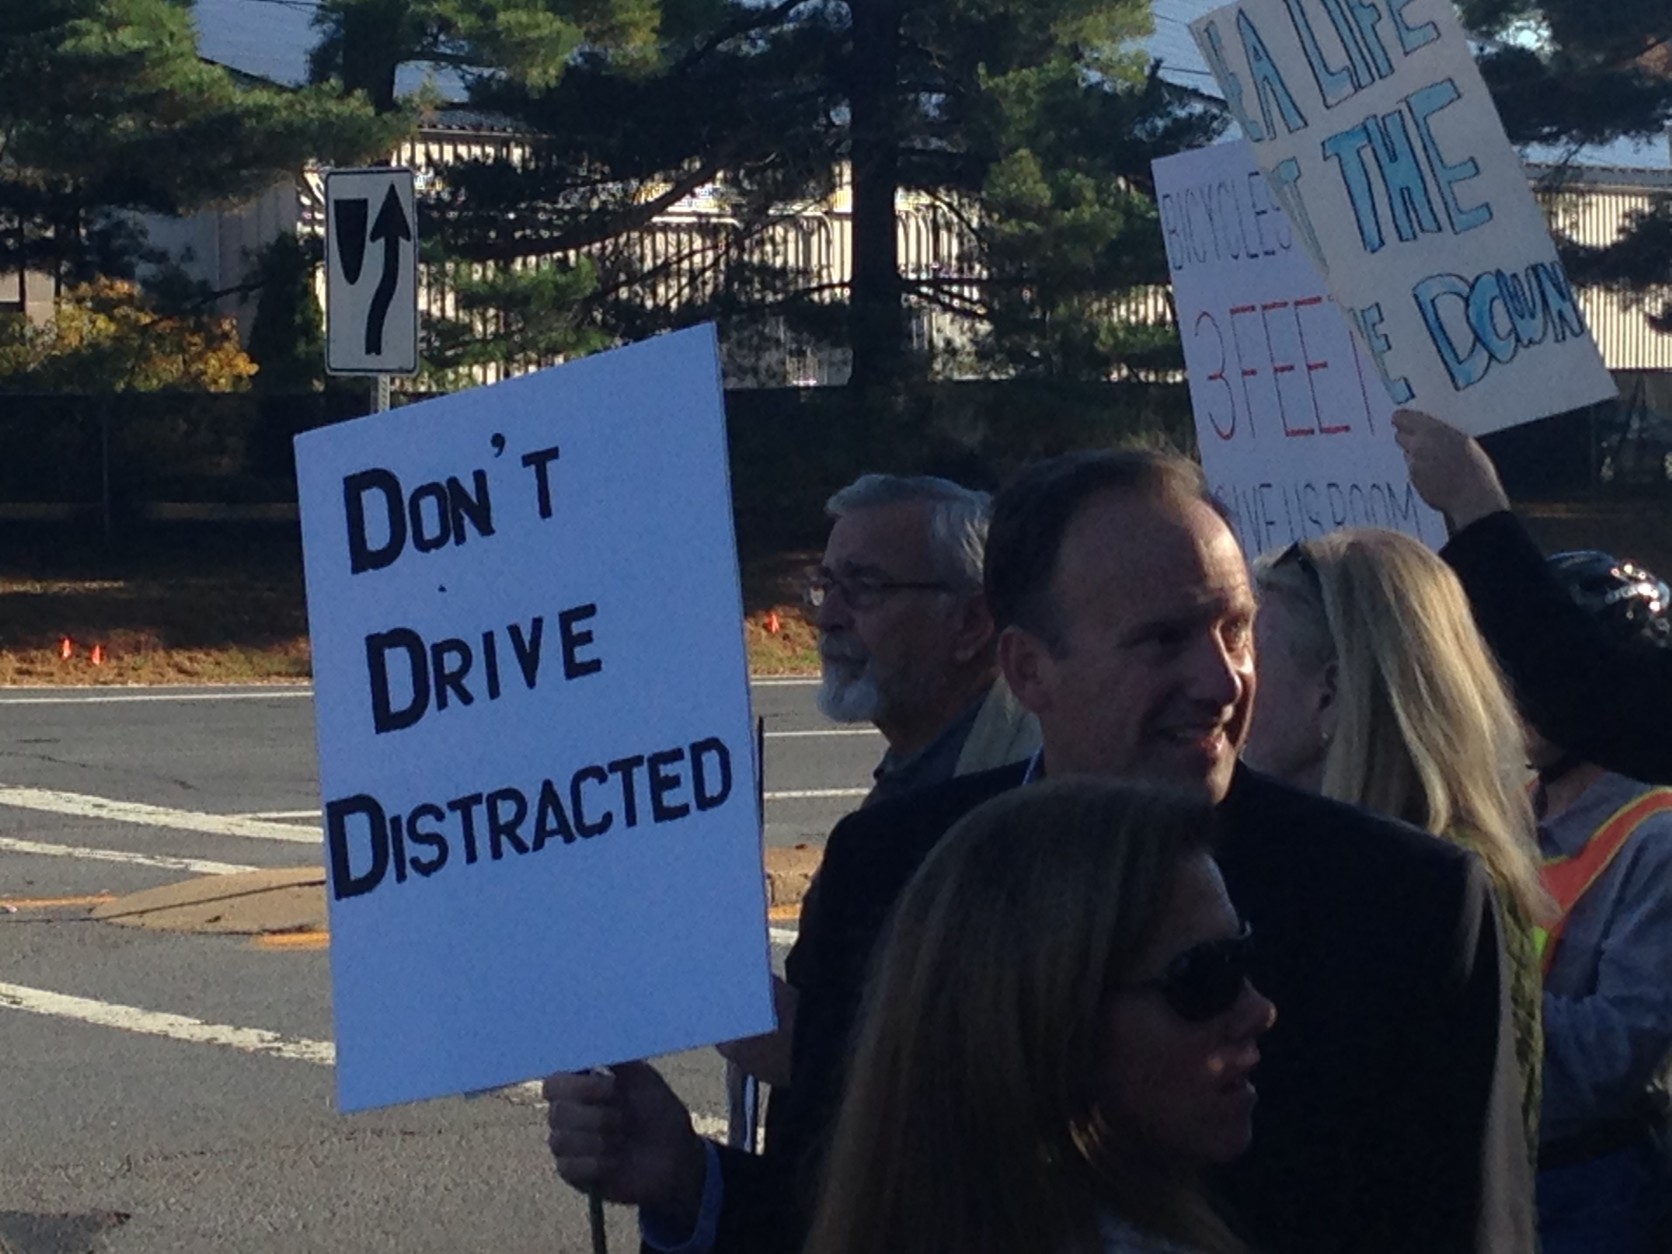 On Tuesday, a few Bethesda residents visited a busy intersection to denounce distracted driving. The residents want motorists to focus on the road, not their cellphones. (WTOP/Jamie Forzato)